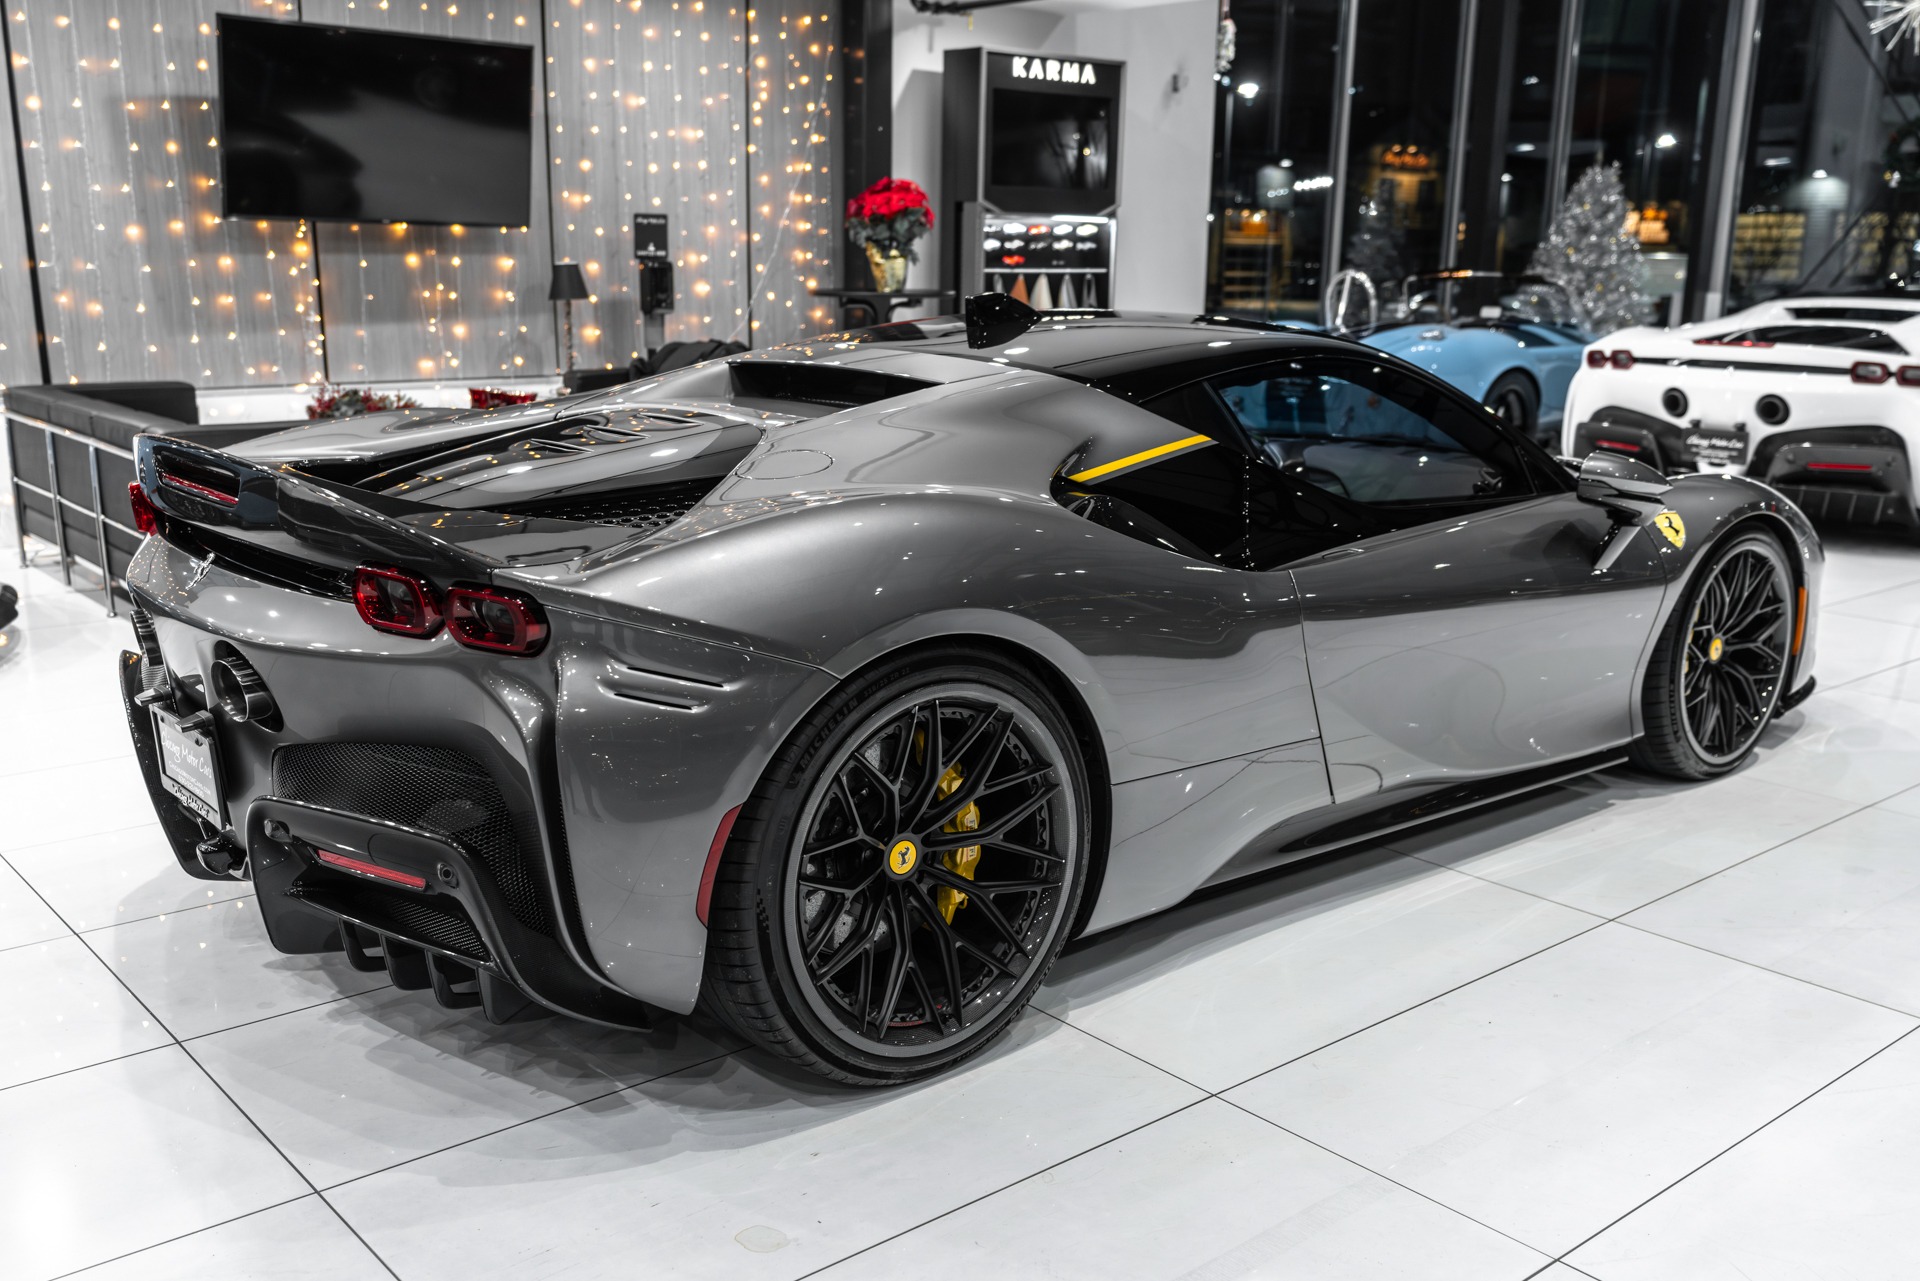 Used-2021-Ferrari-SF90-Stradale-Coupe-Assetto-Fiorano-Package-Original-MSRP-775k-TONS-of-Carbon-Fiber